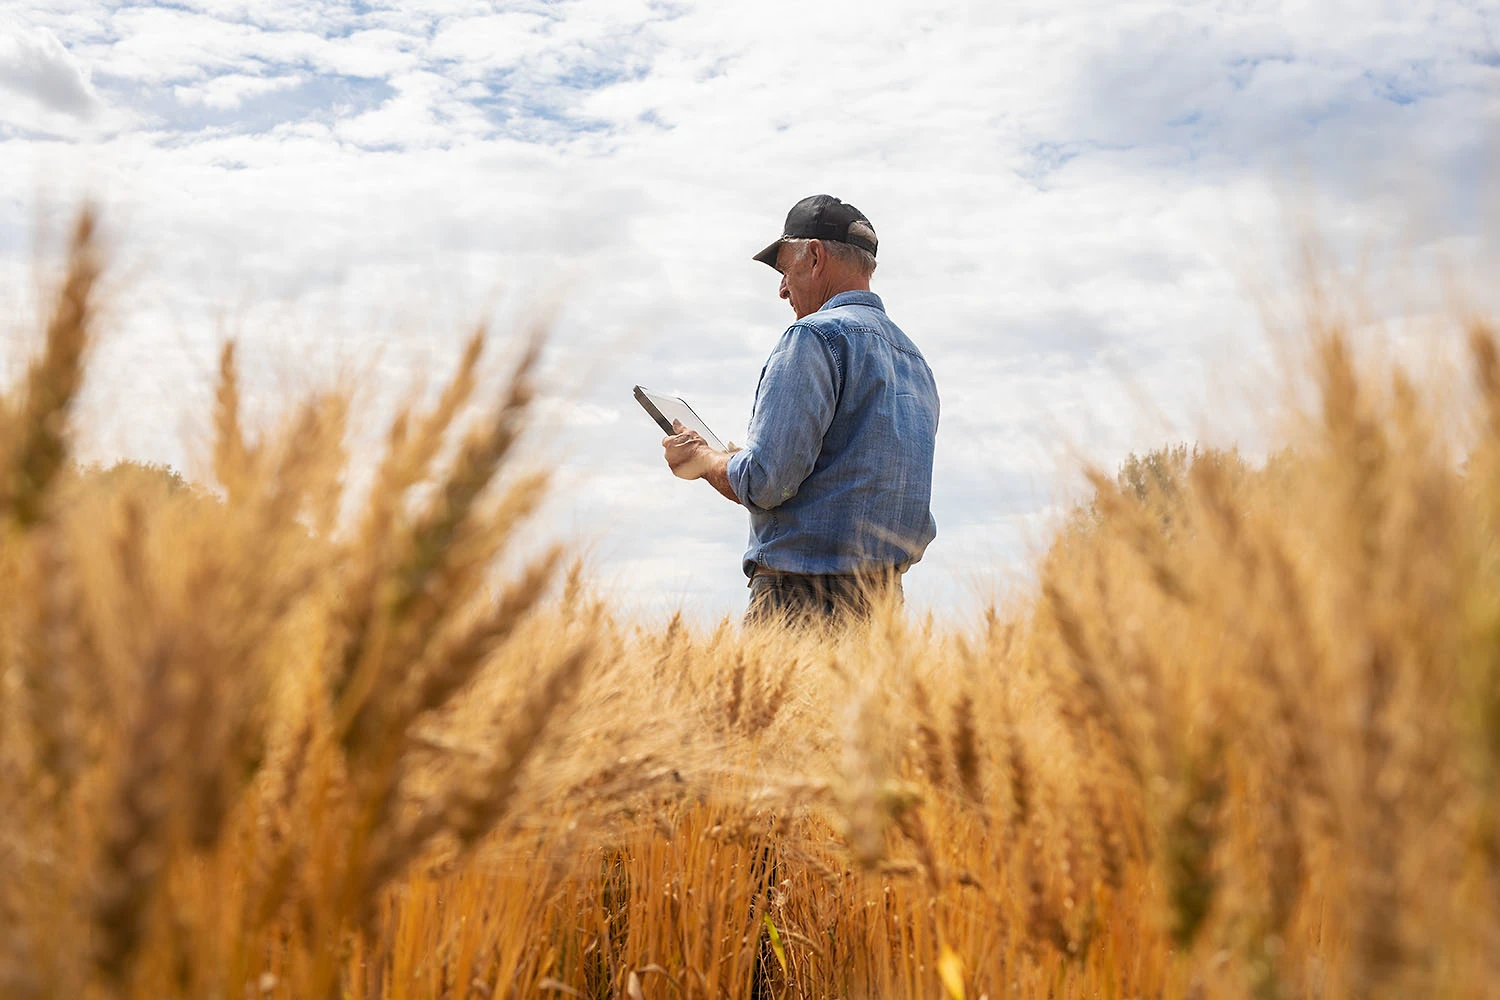 Farmer in a wheat field amongst crops using tablet for crop scouting under a blue sky with some clouds